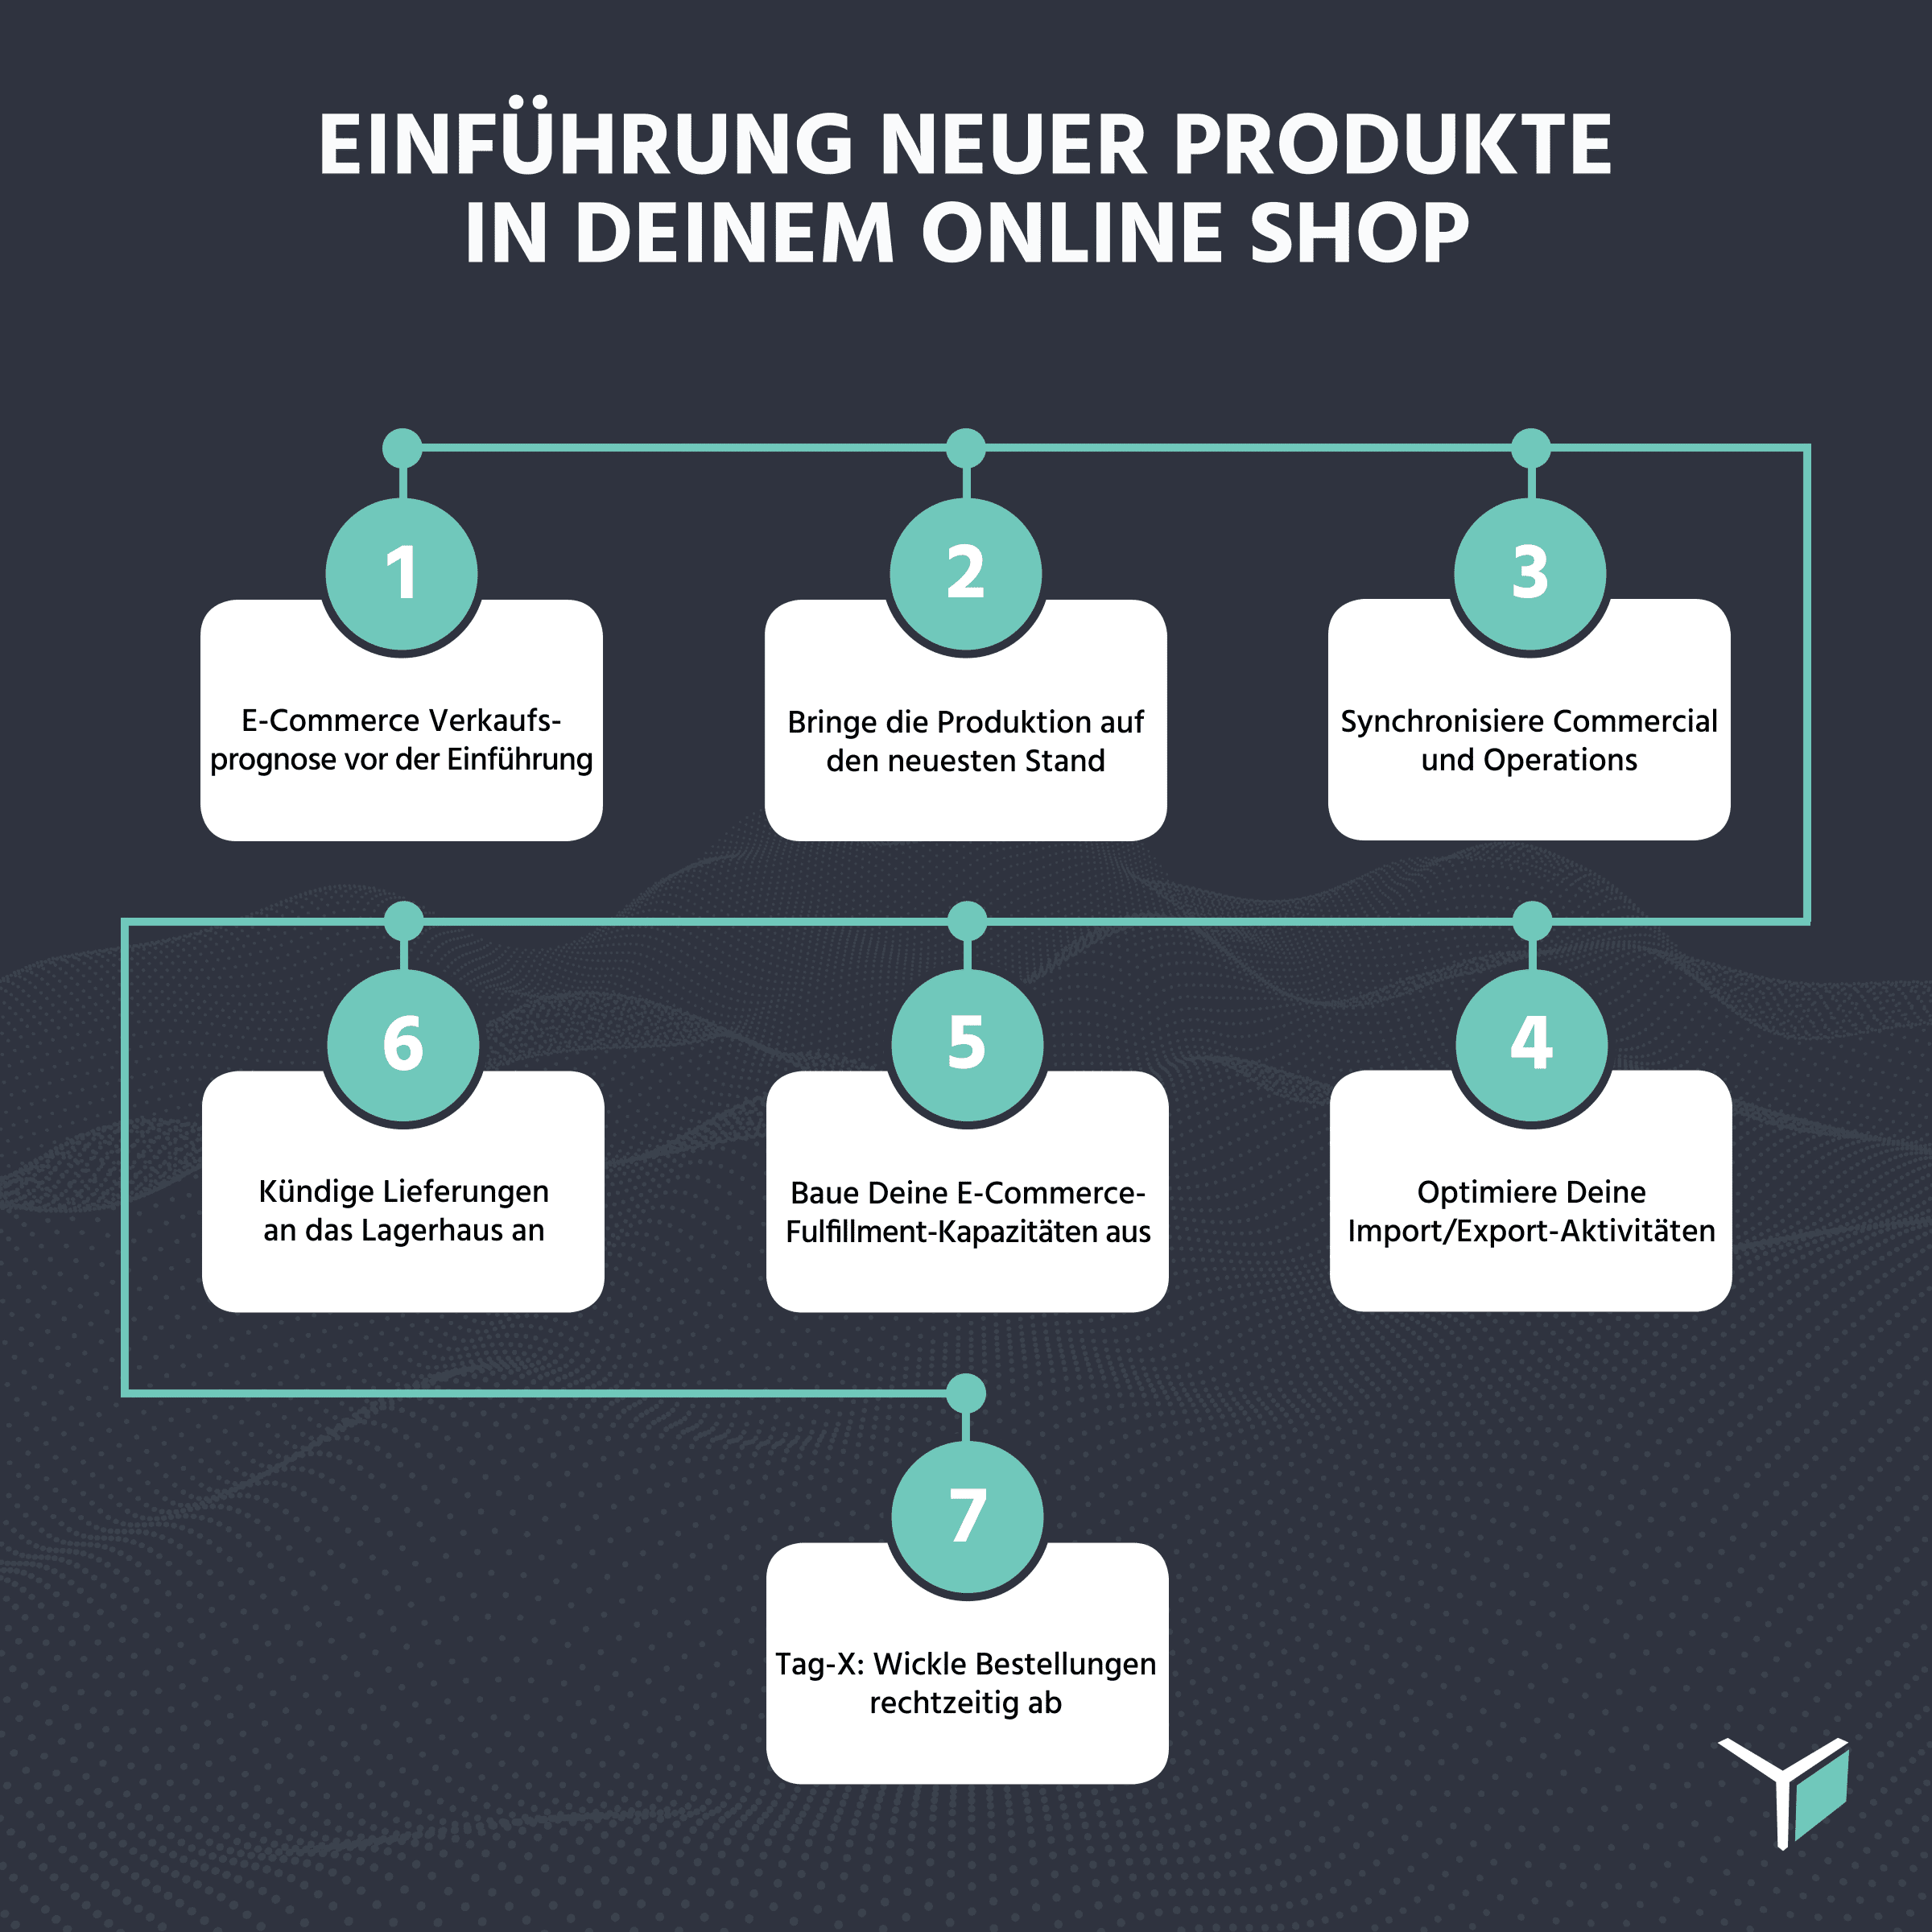 Launch_new_products_infographic_DE-1